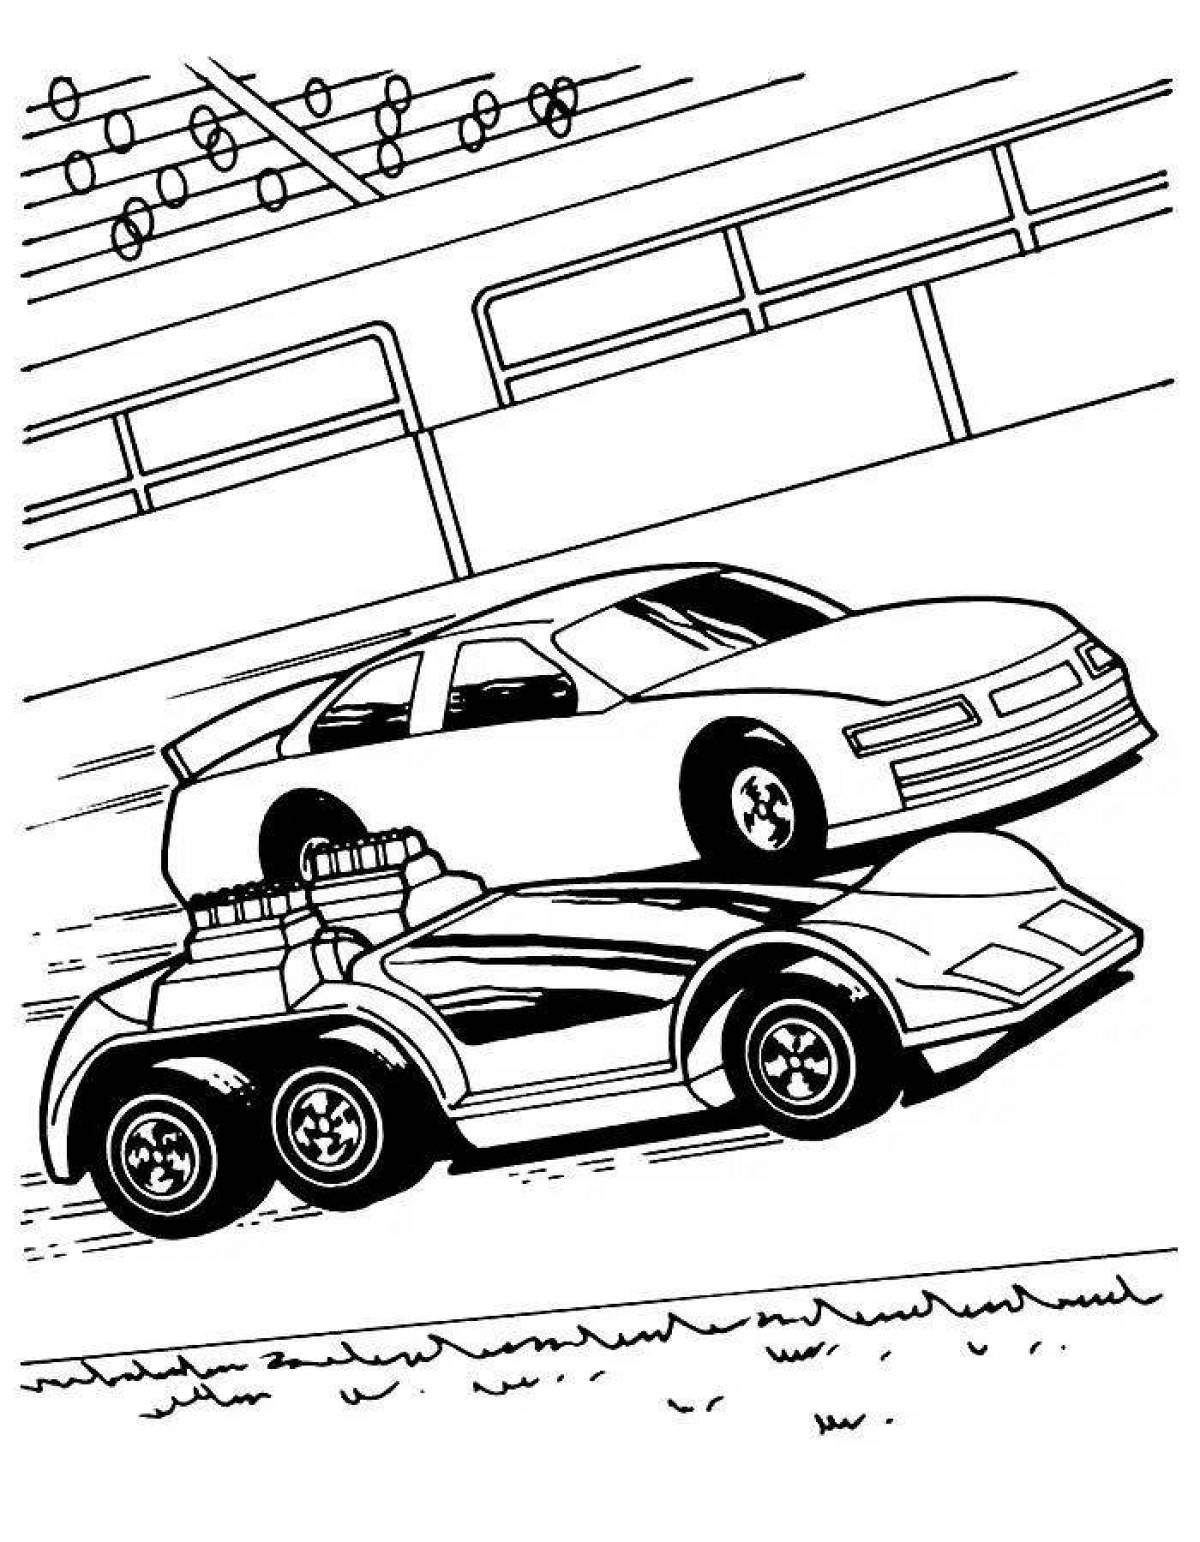 Impressive hot wheels coloring book for boys